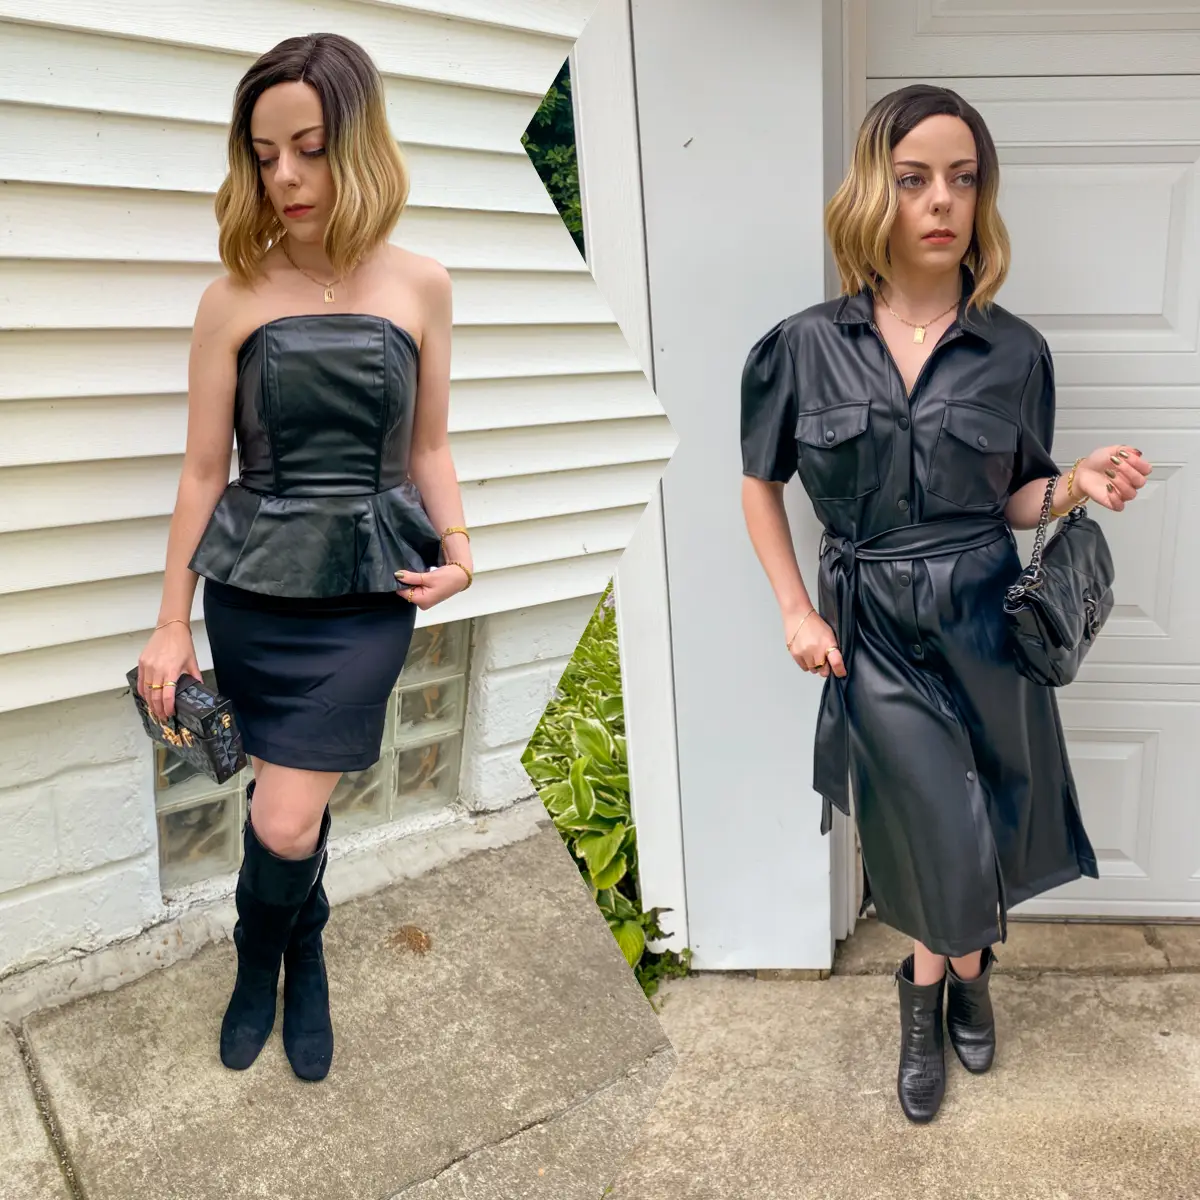 Black Leather Dress Summer Outfits (11 ideas & outfits)